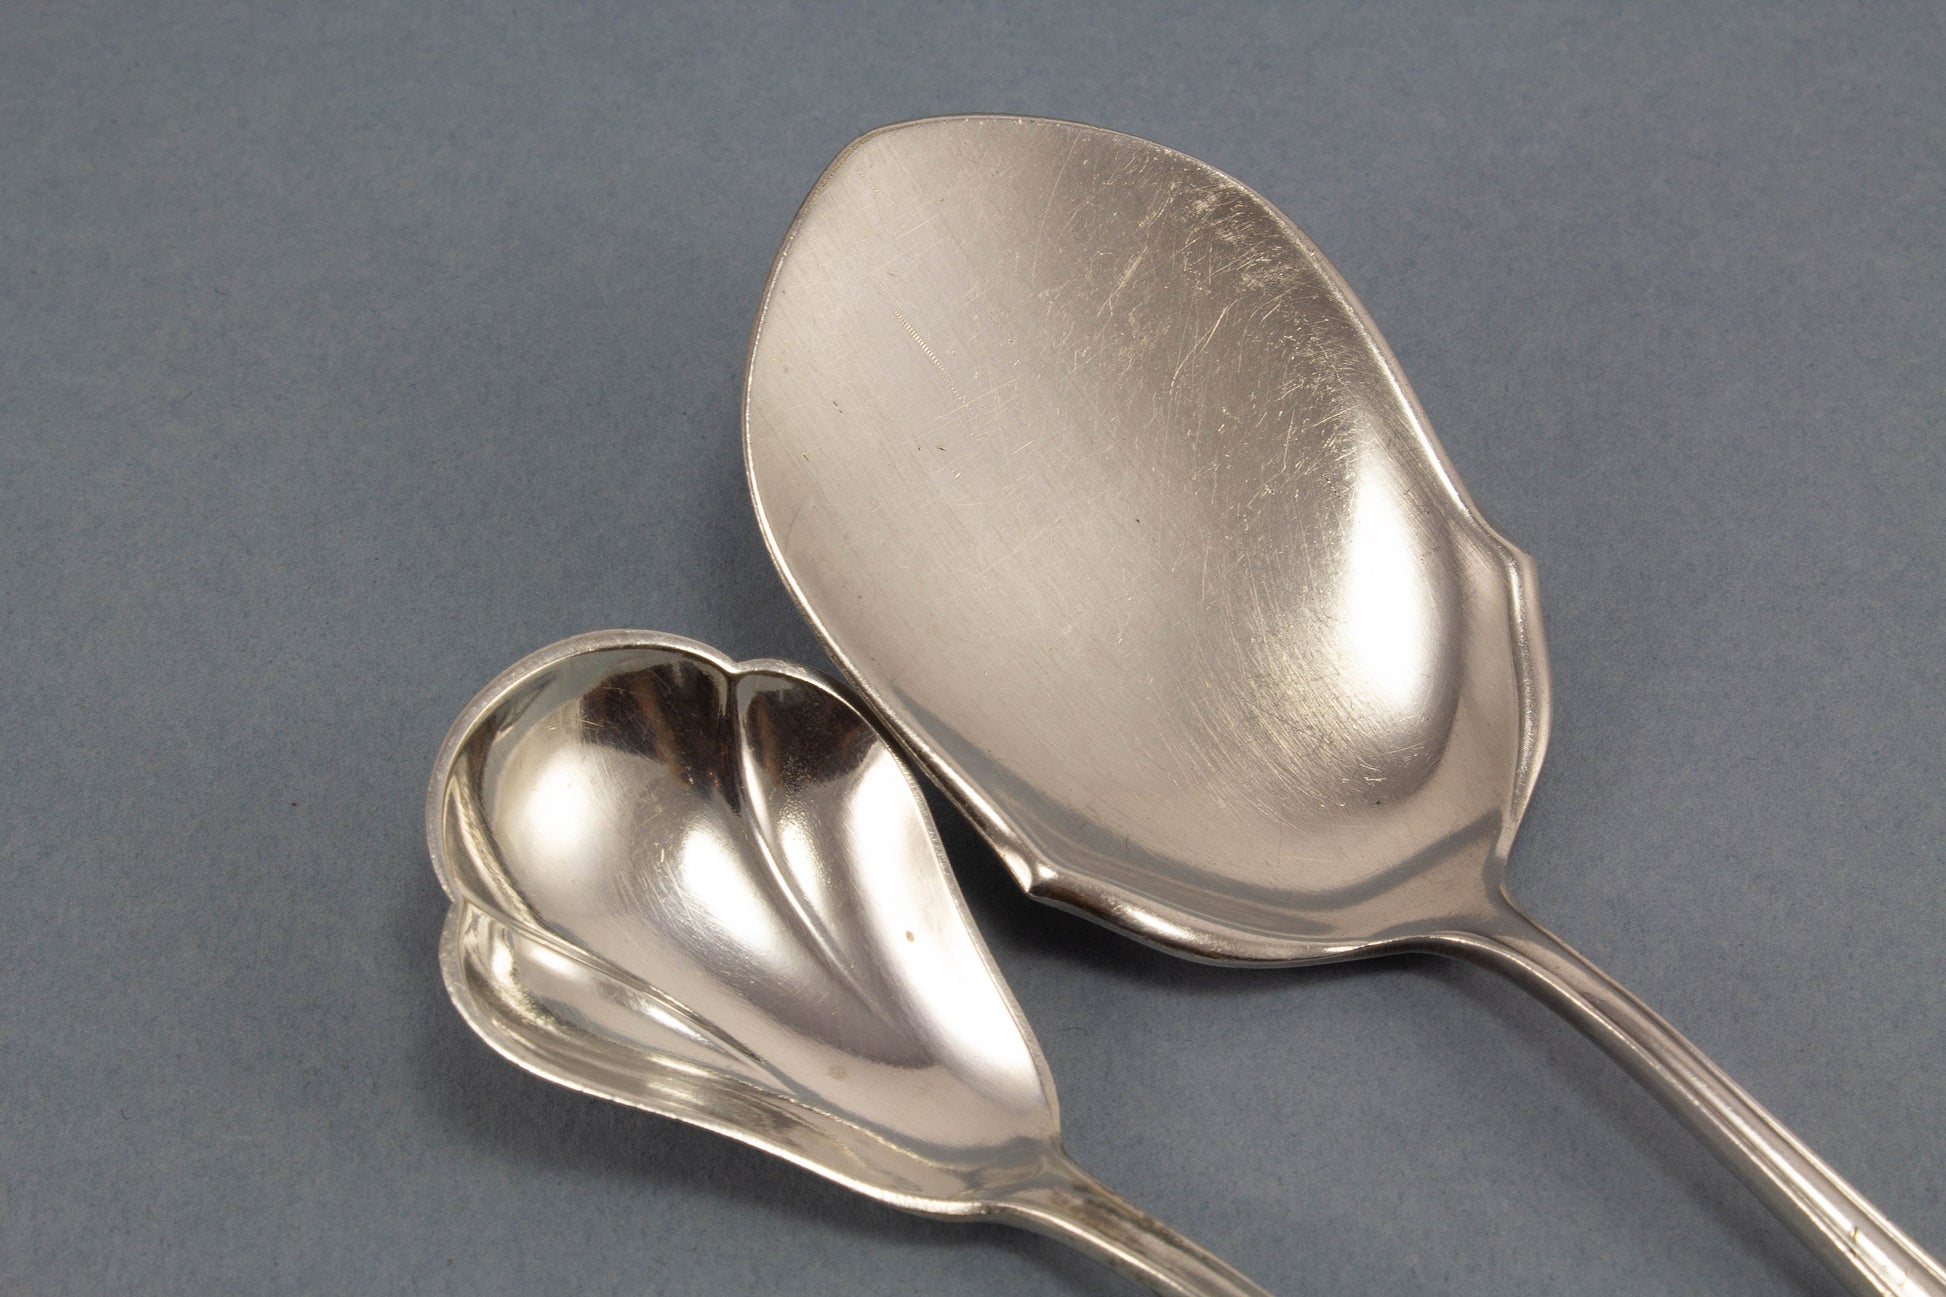 Small pastry server with matching spoon